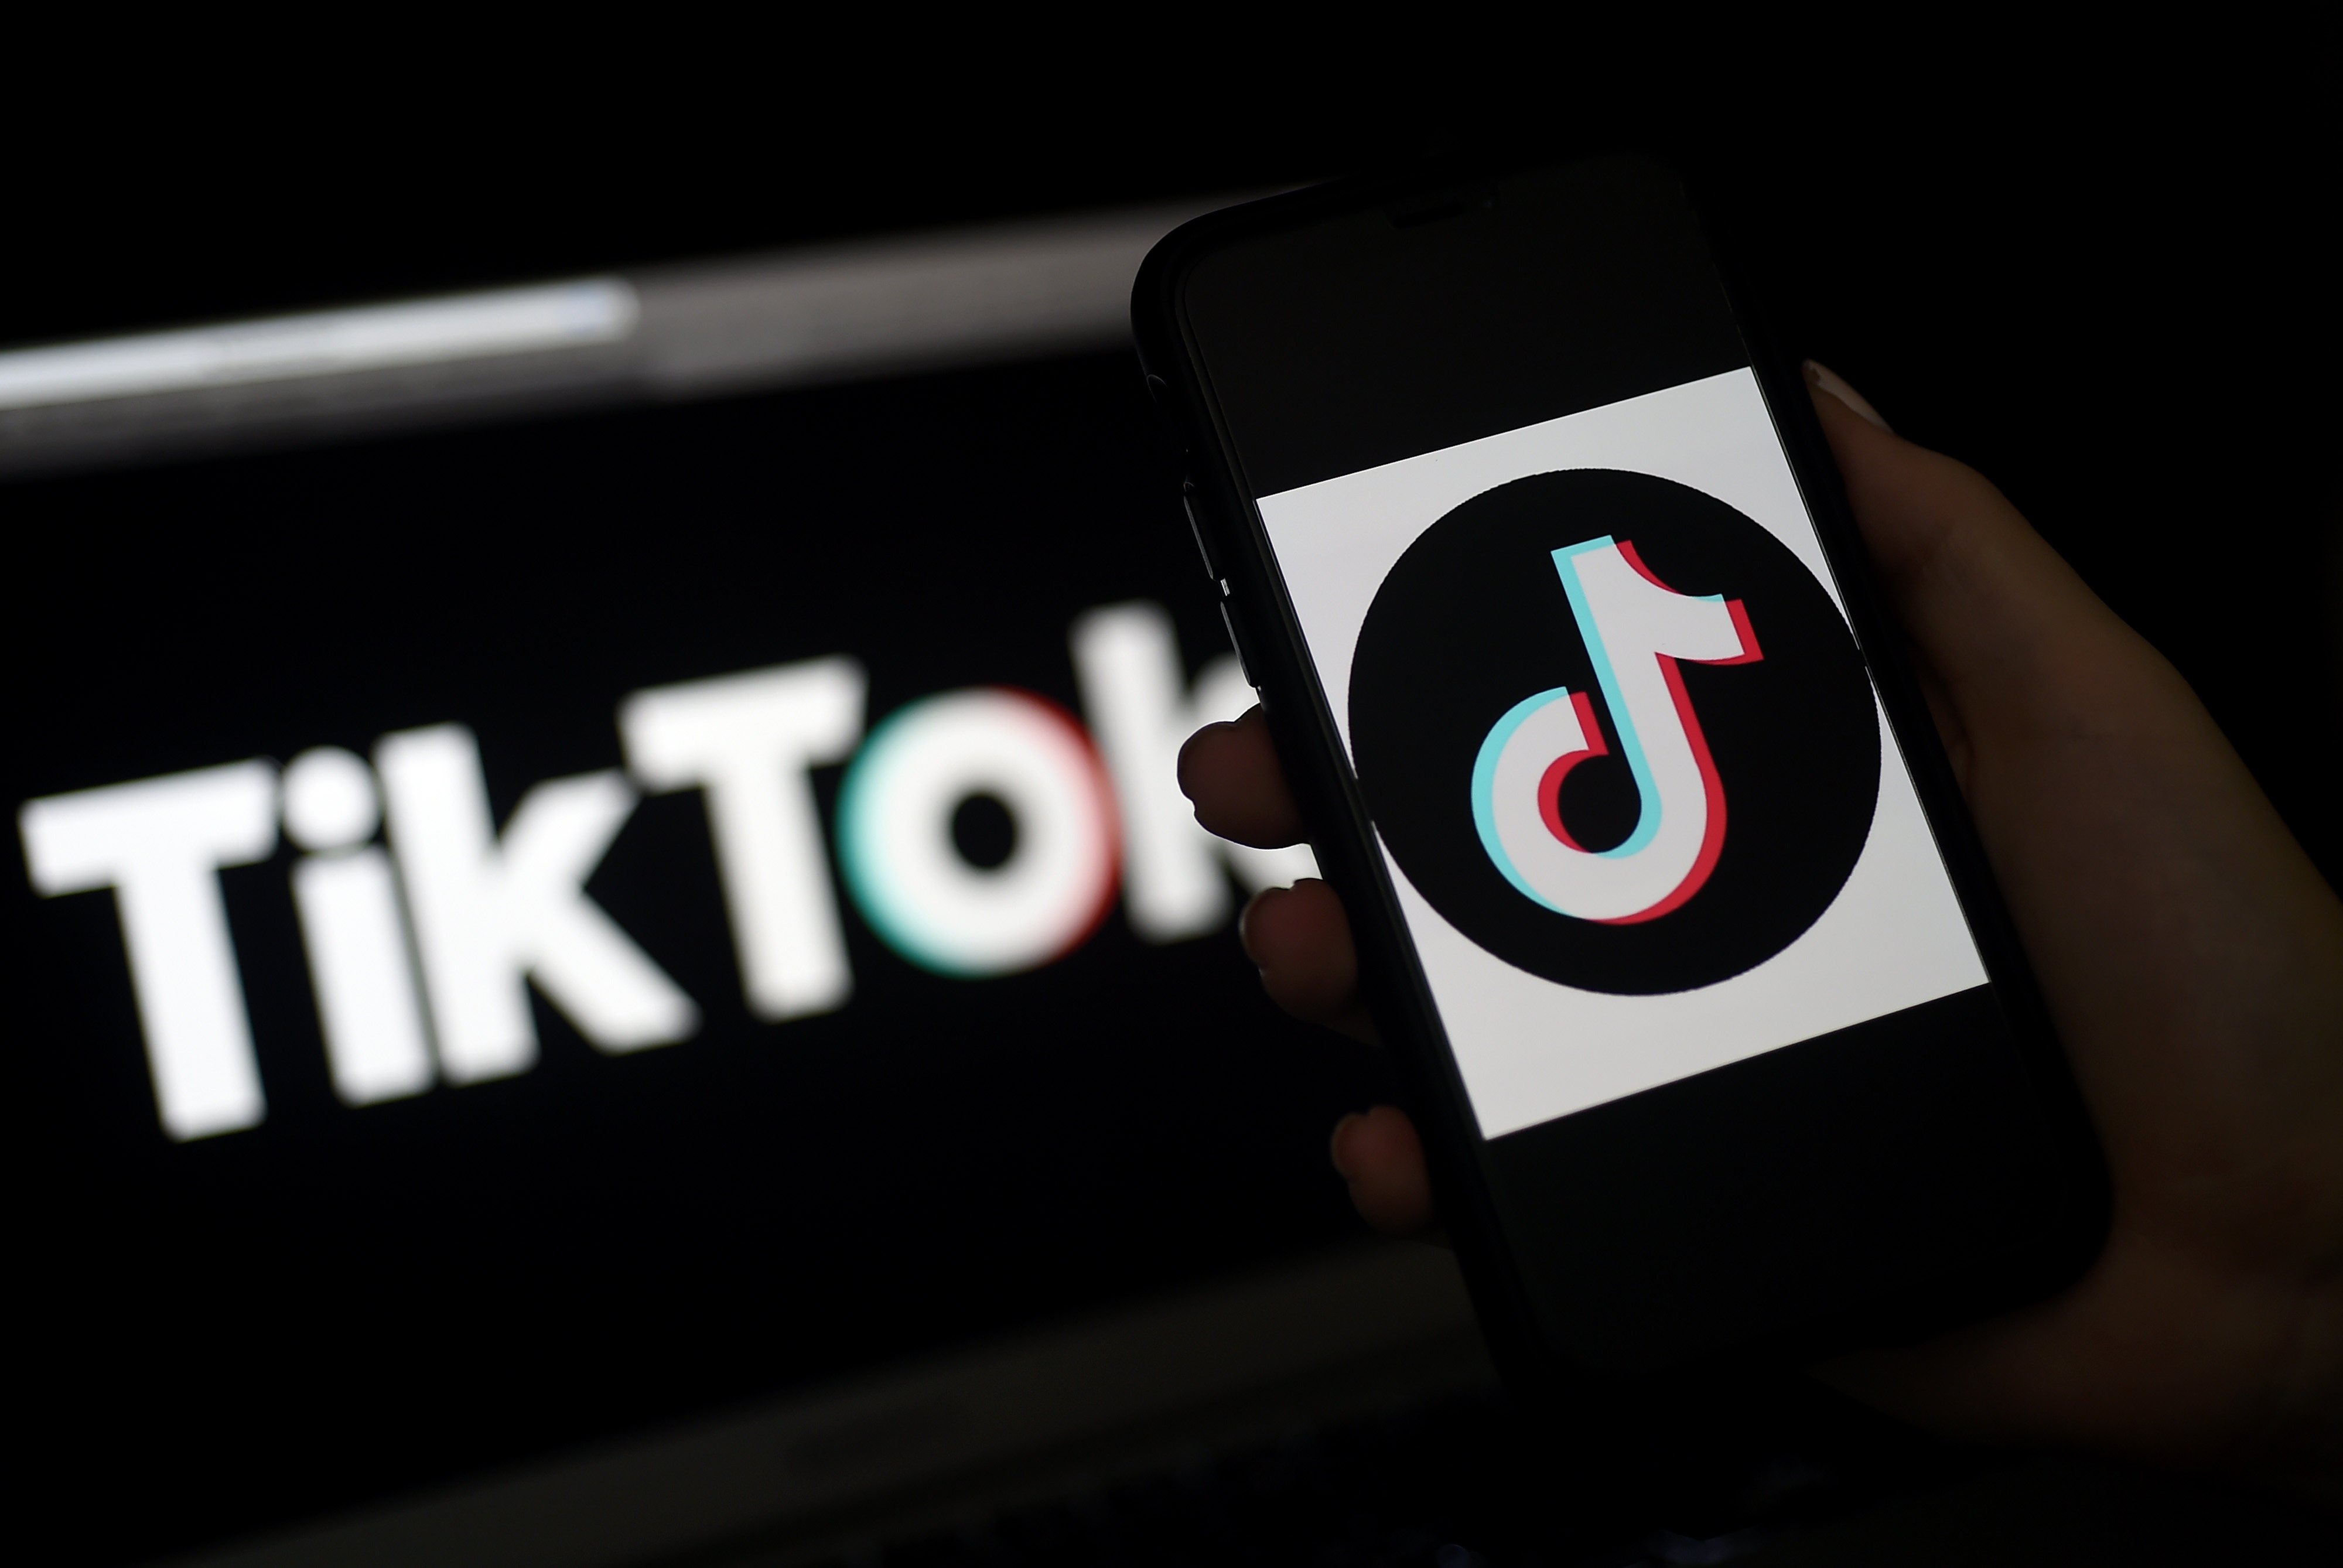 TikTok is fighting allegations in the US that it violated the Children’s Online Privacy Protection Act. Photo: AFP